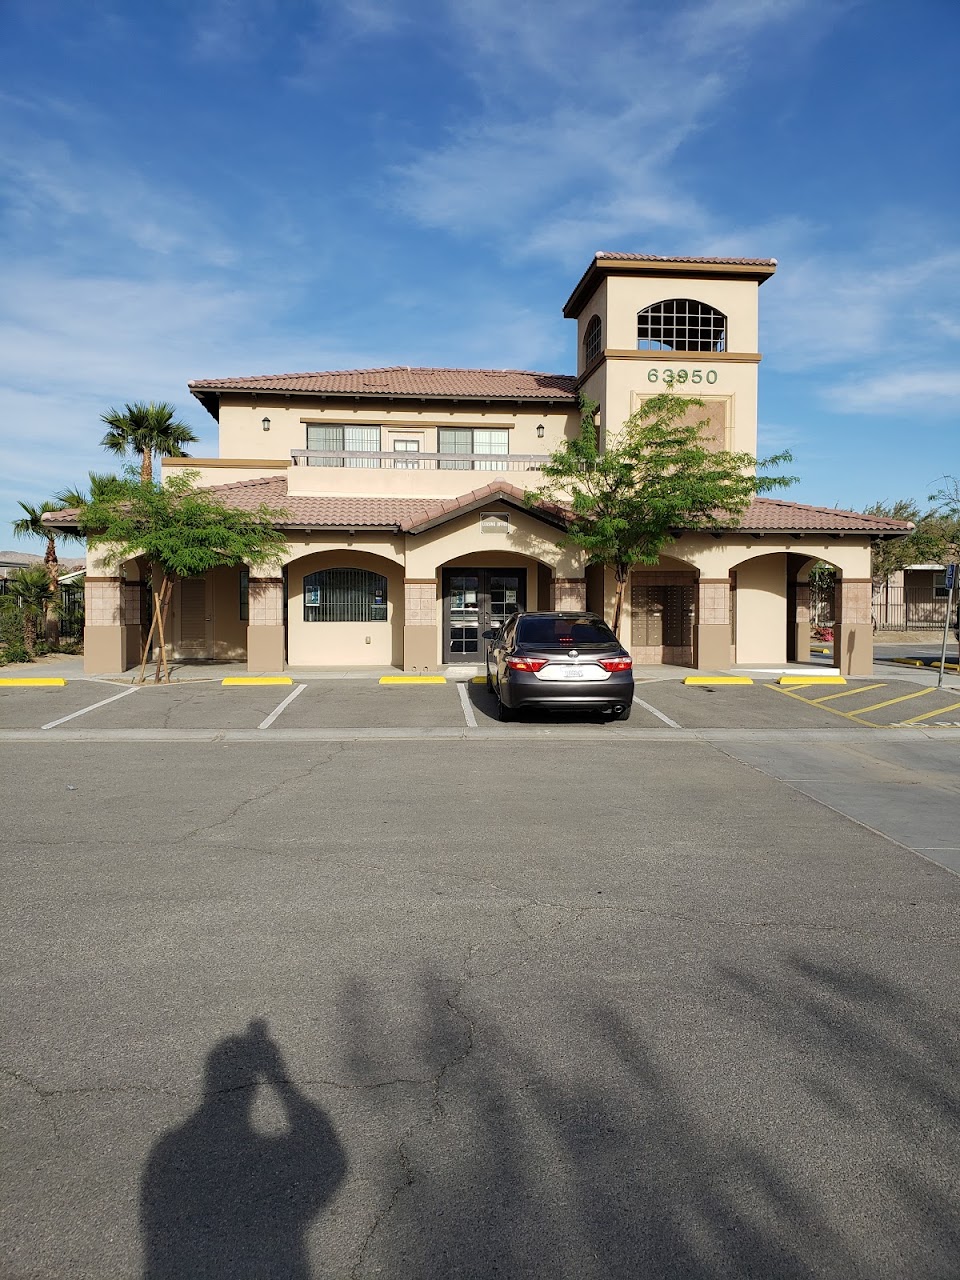 Photo of PASEO DE LOS HEROES II. Affordable housing located at 63950 LINCOLN AVE MECCA, CA 92254